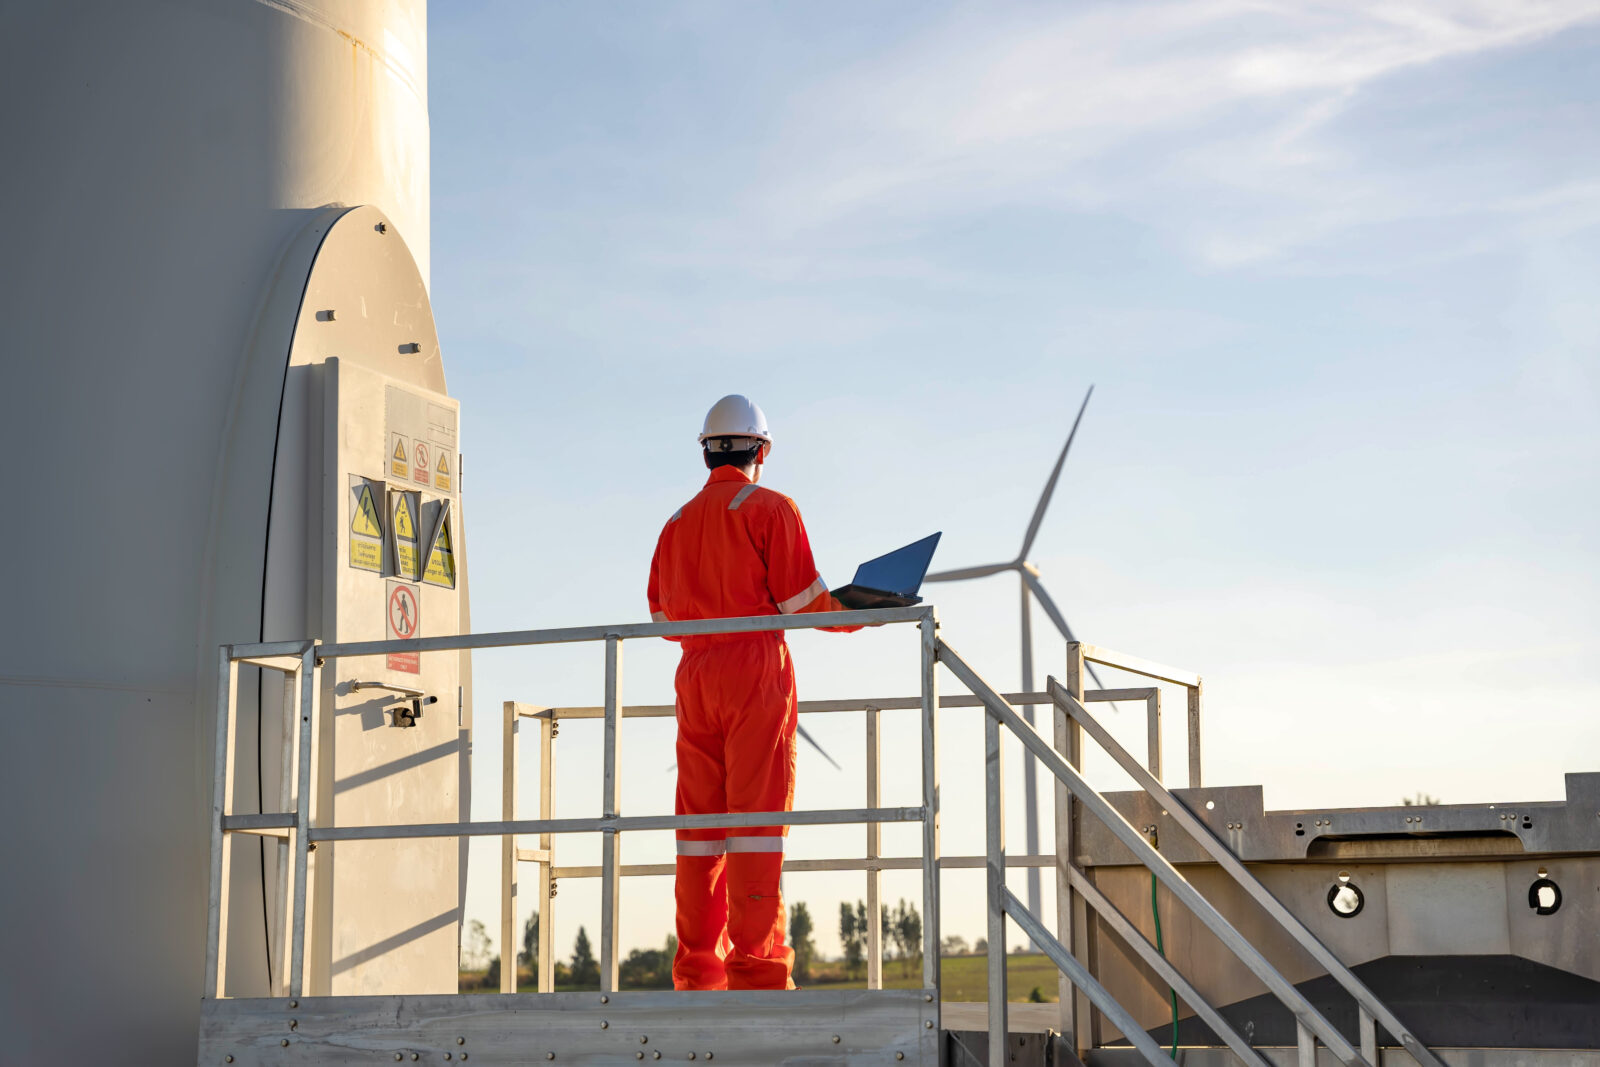 Benefits of an IoT Platform for the Power and Energy Industries